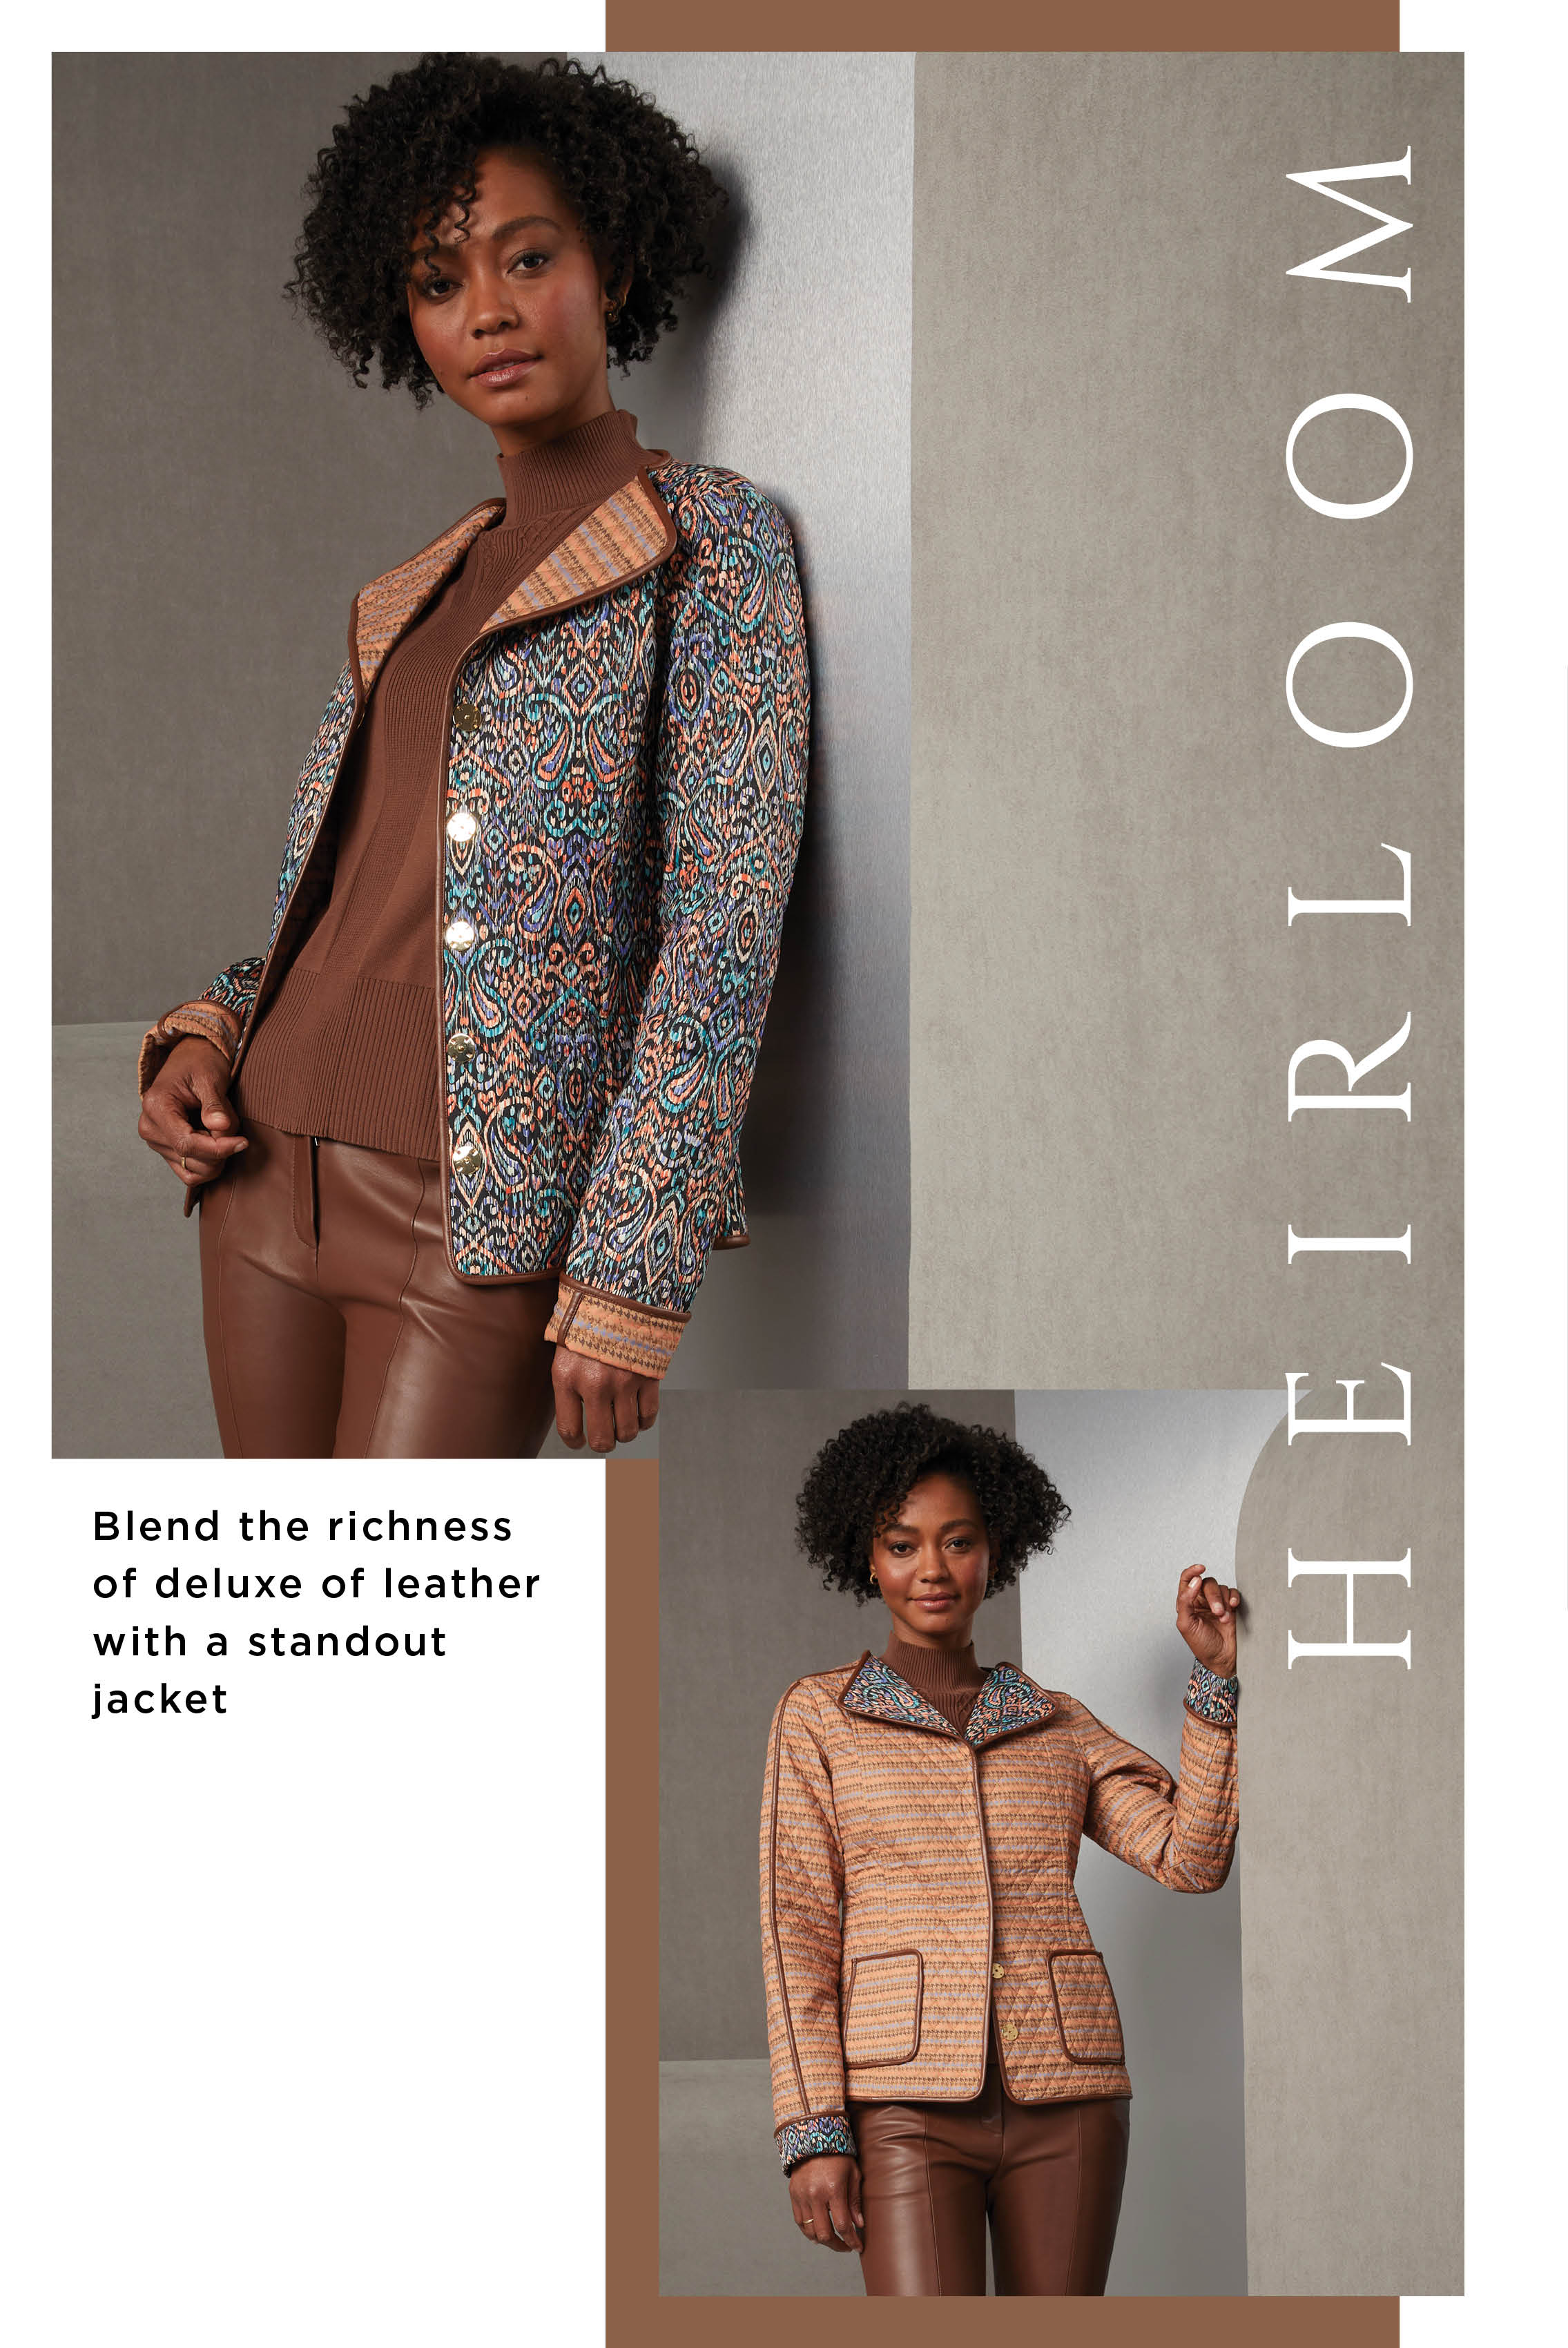 Step into autumn with a memorable outfit that blends the richness of deluxe caramel leather and the comfort of organic Suvin cotton. The centerpiece is a reversible pongee barn jacket, featuring mosaic paisley and houndstooth prints.